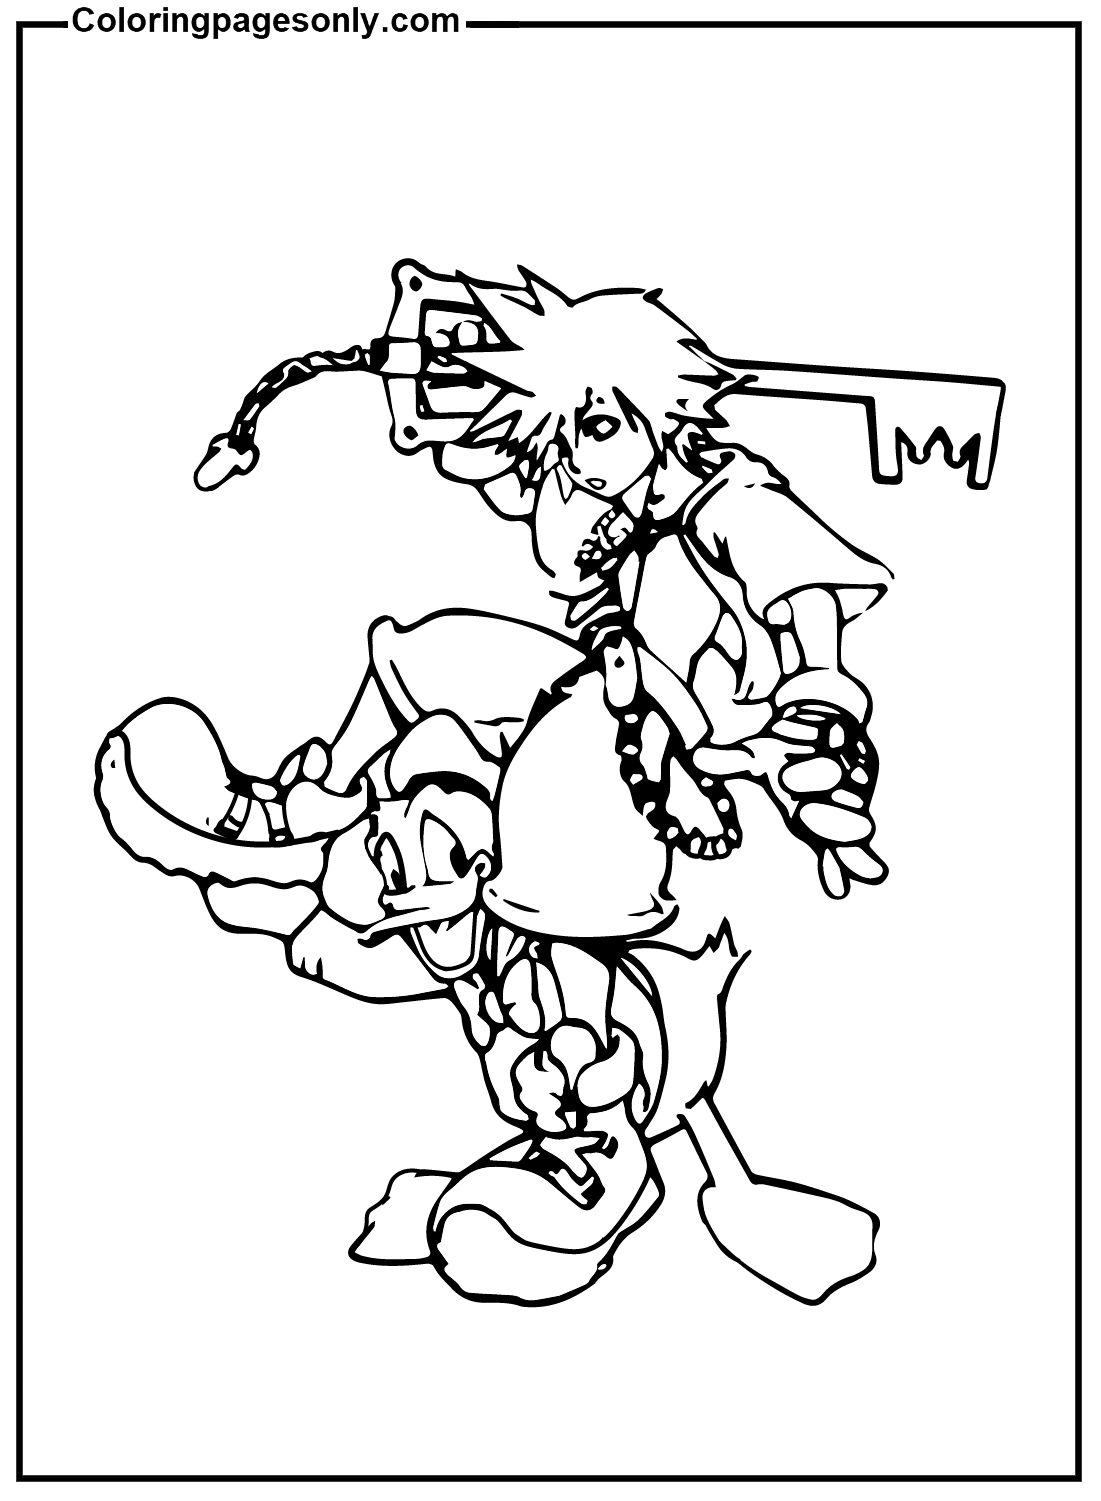 Kingdom Hearts Images Coloring Pages